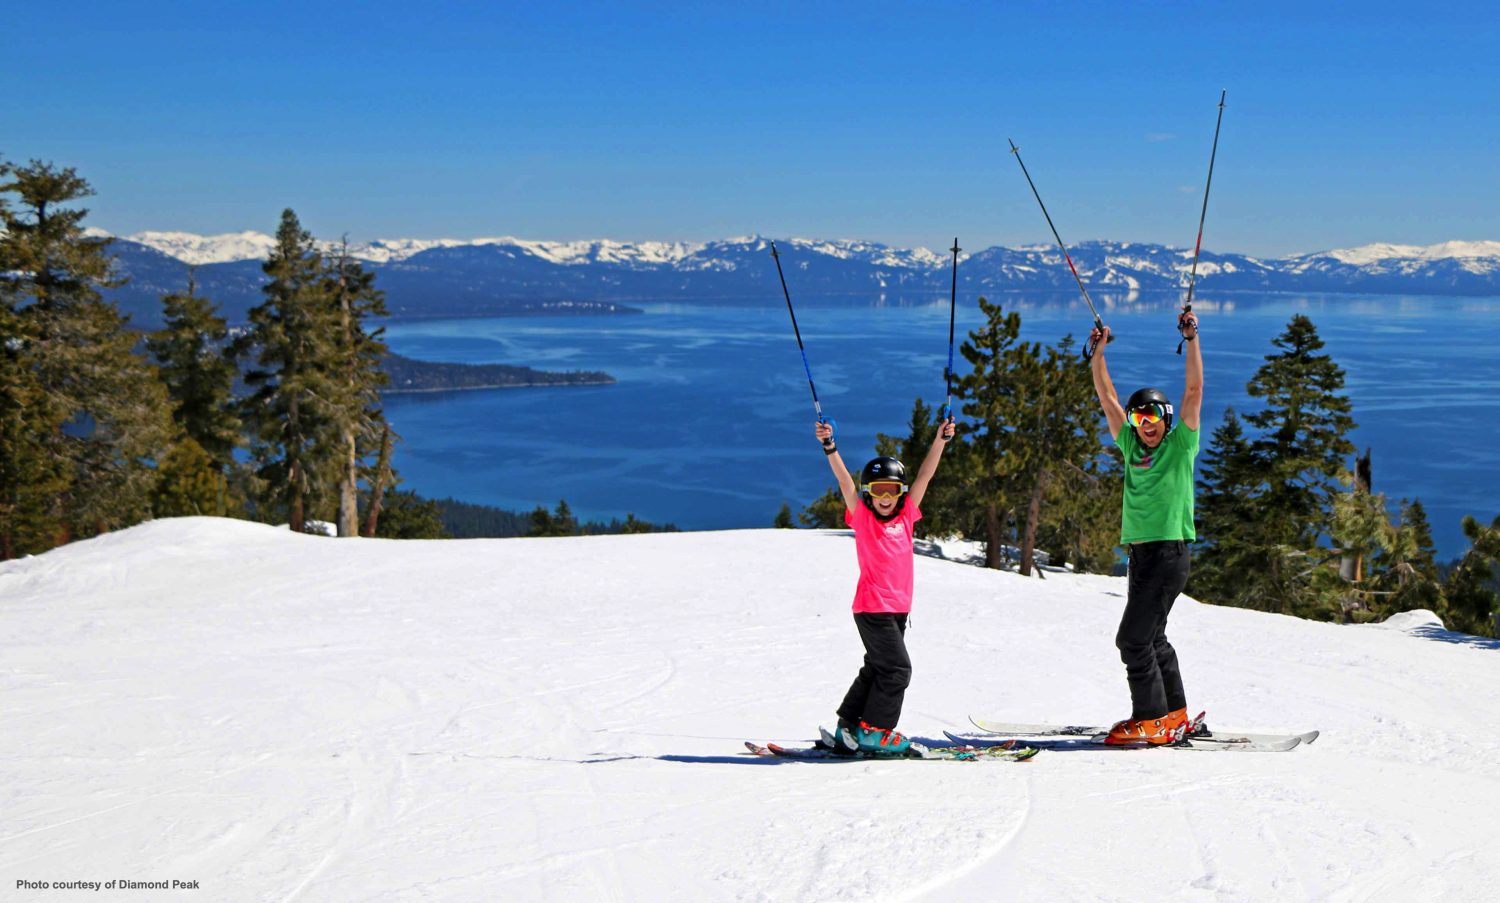 dad and son skiing during the sping in the tahoe lake area